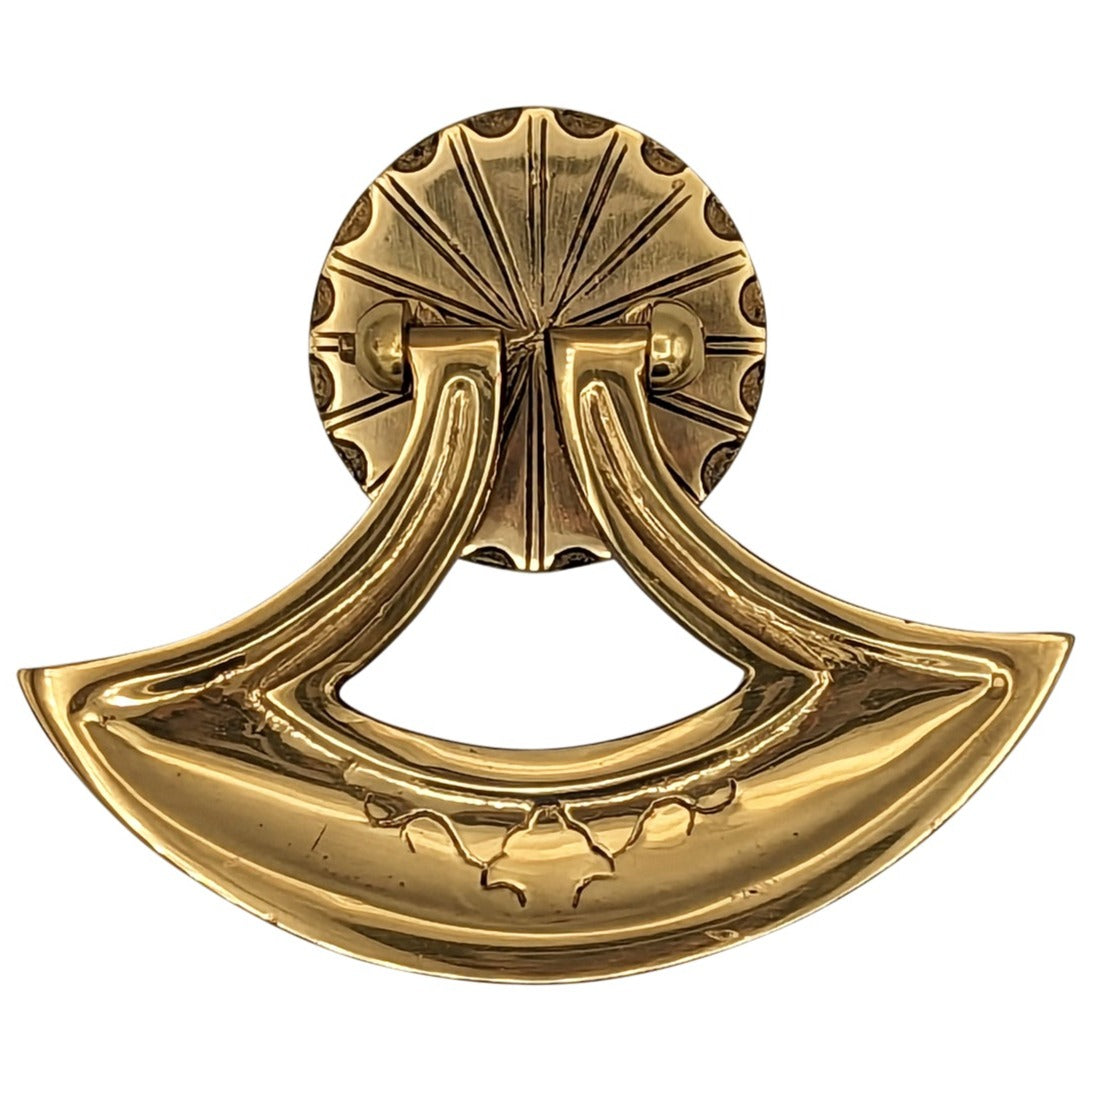 4 Inch Solid Brass Curved Drop Pull (Several Finishes Available)